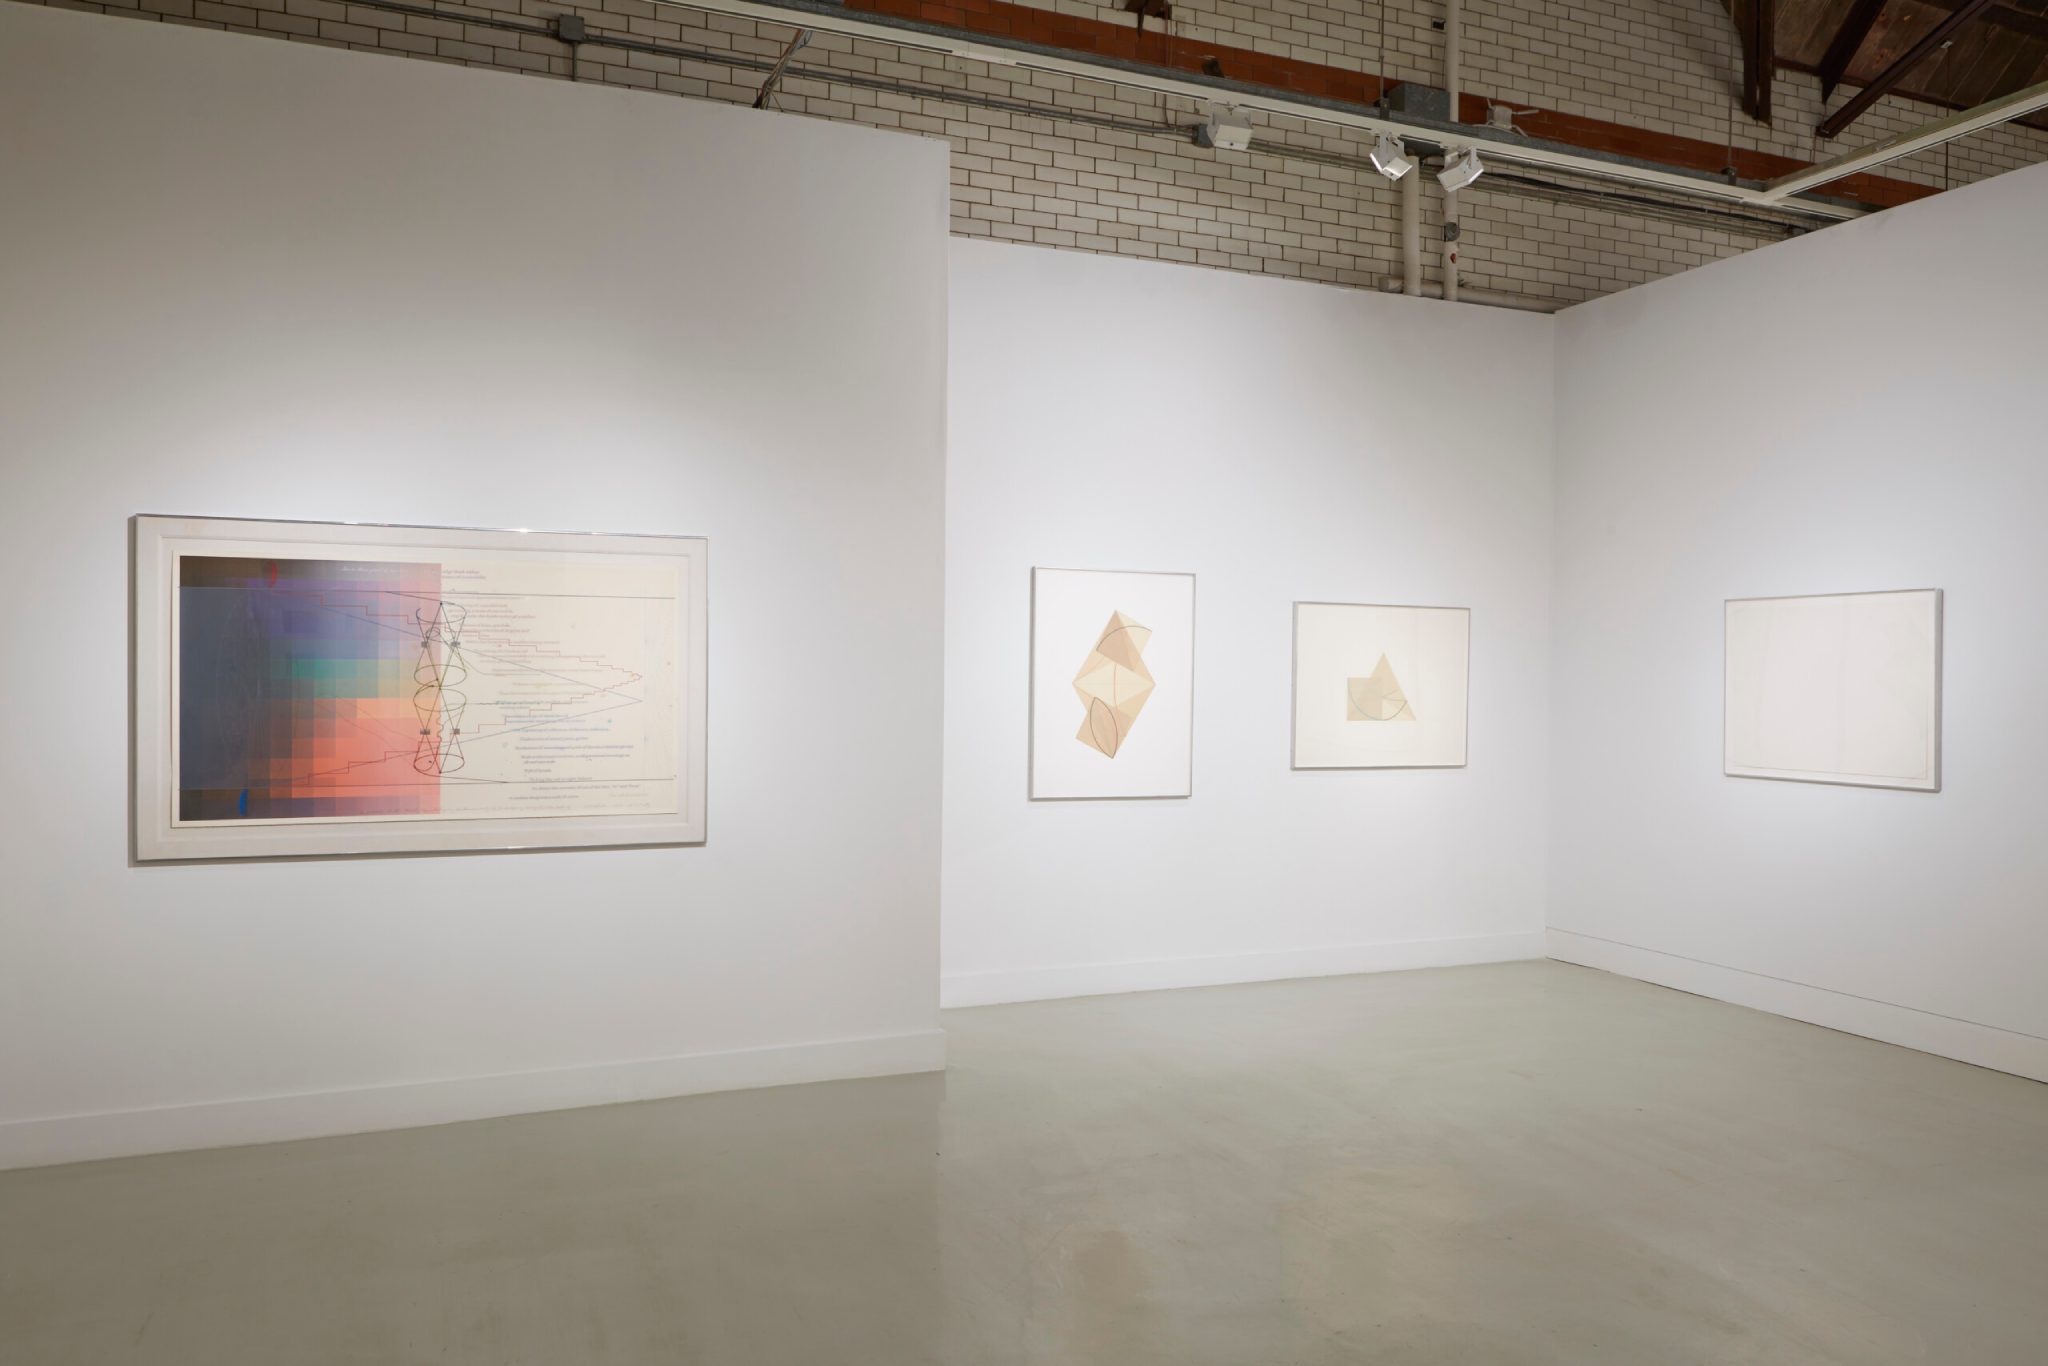 Installation view from "Coordinates: Drawings and Prints Marking Five Exhibitions at Beaver College (1977-84)" featuring four panels of geometric pieces.